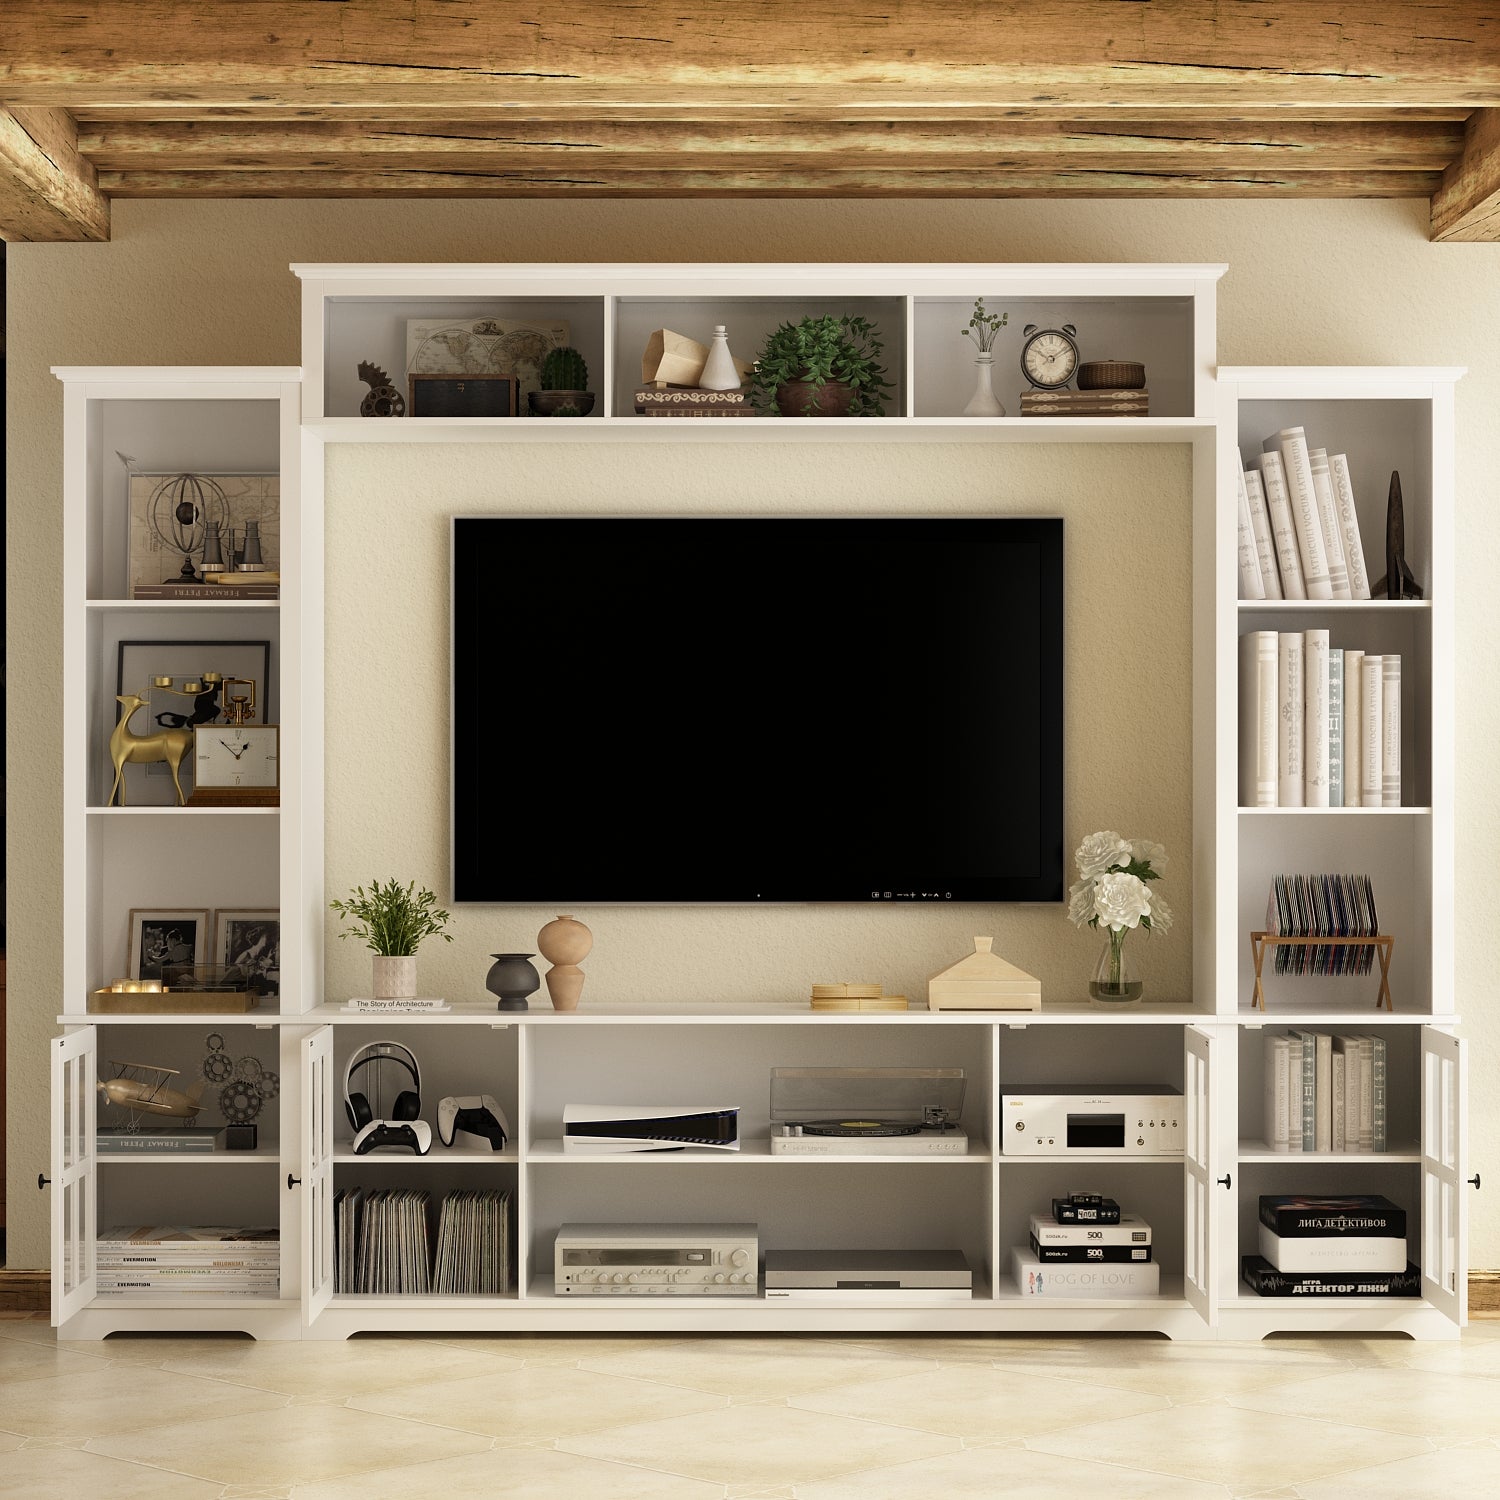 TV Stand Large Entertainment Wall Unit White Entertainment Center for Living Room